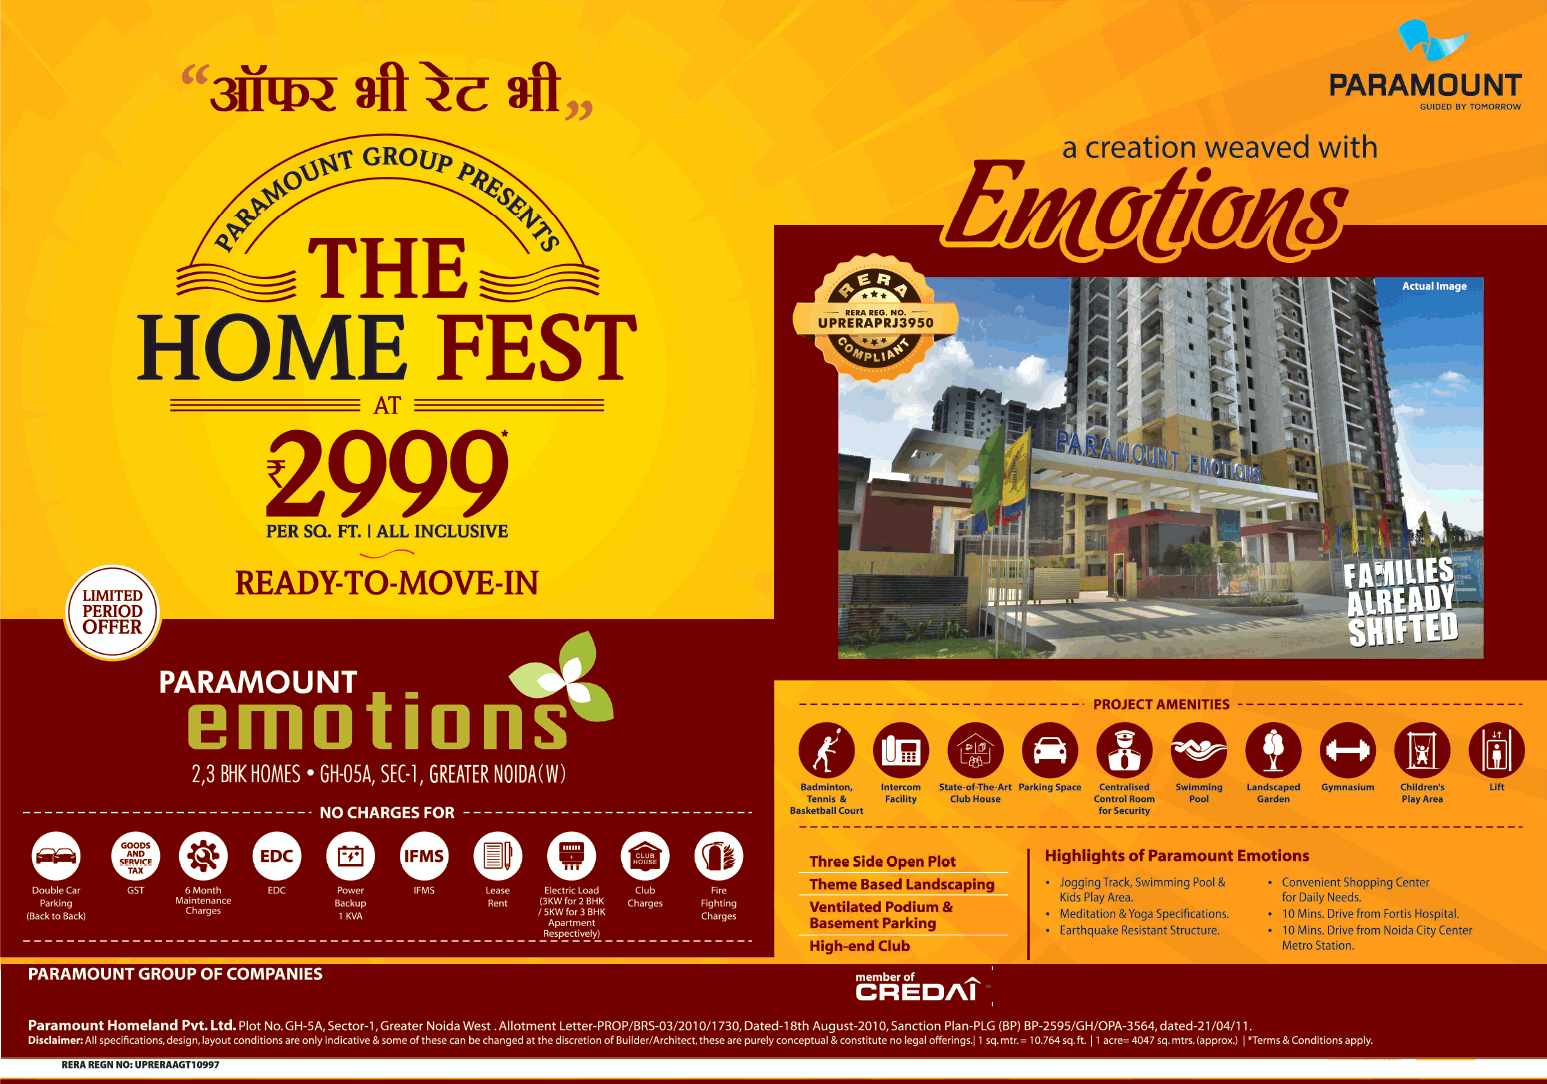 Book ready to move in homes at Rs. 2999 per sq.ft. at Paramount Emotions in Greater Noida Update